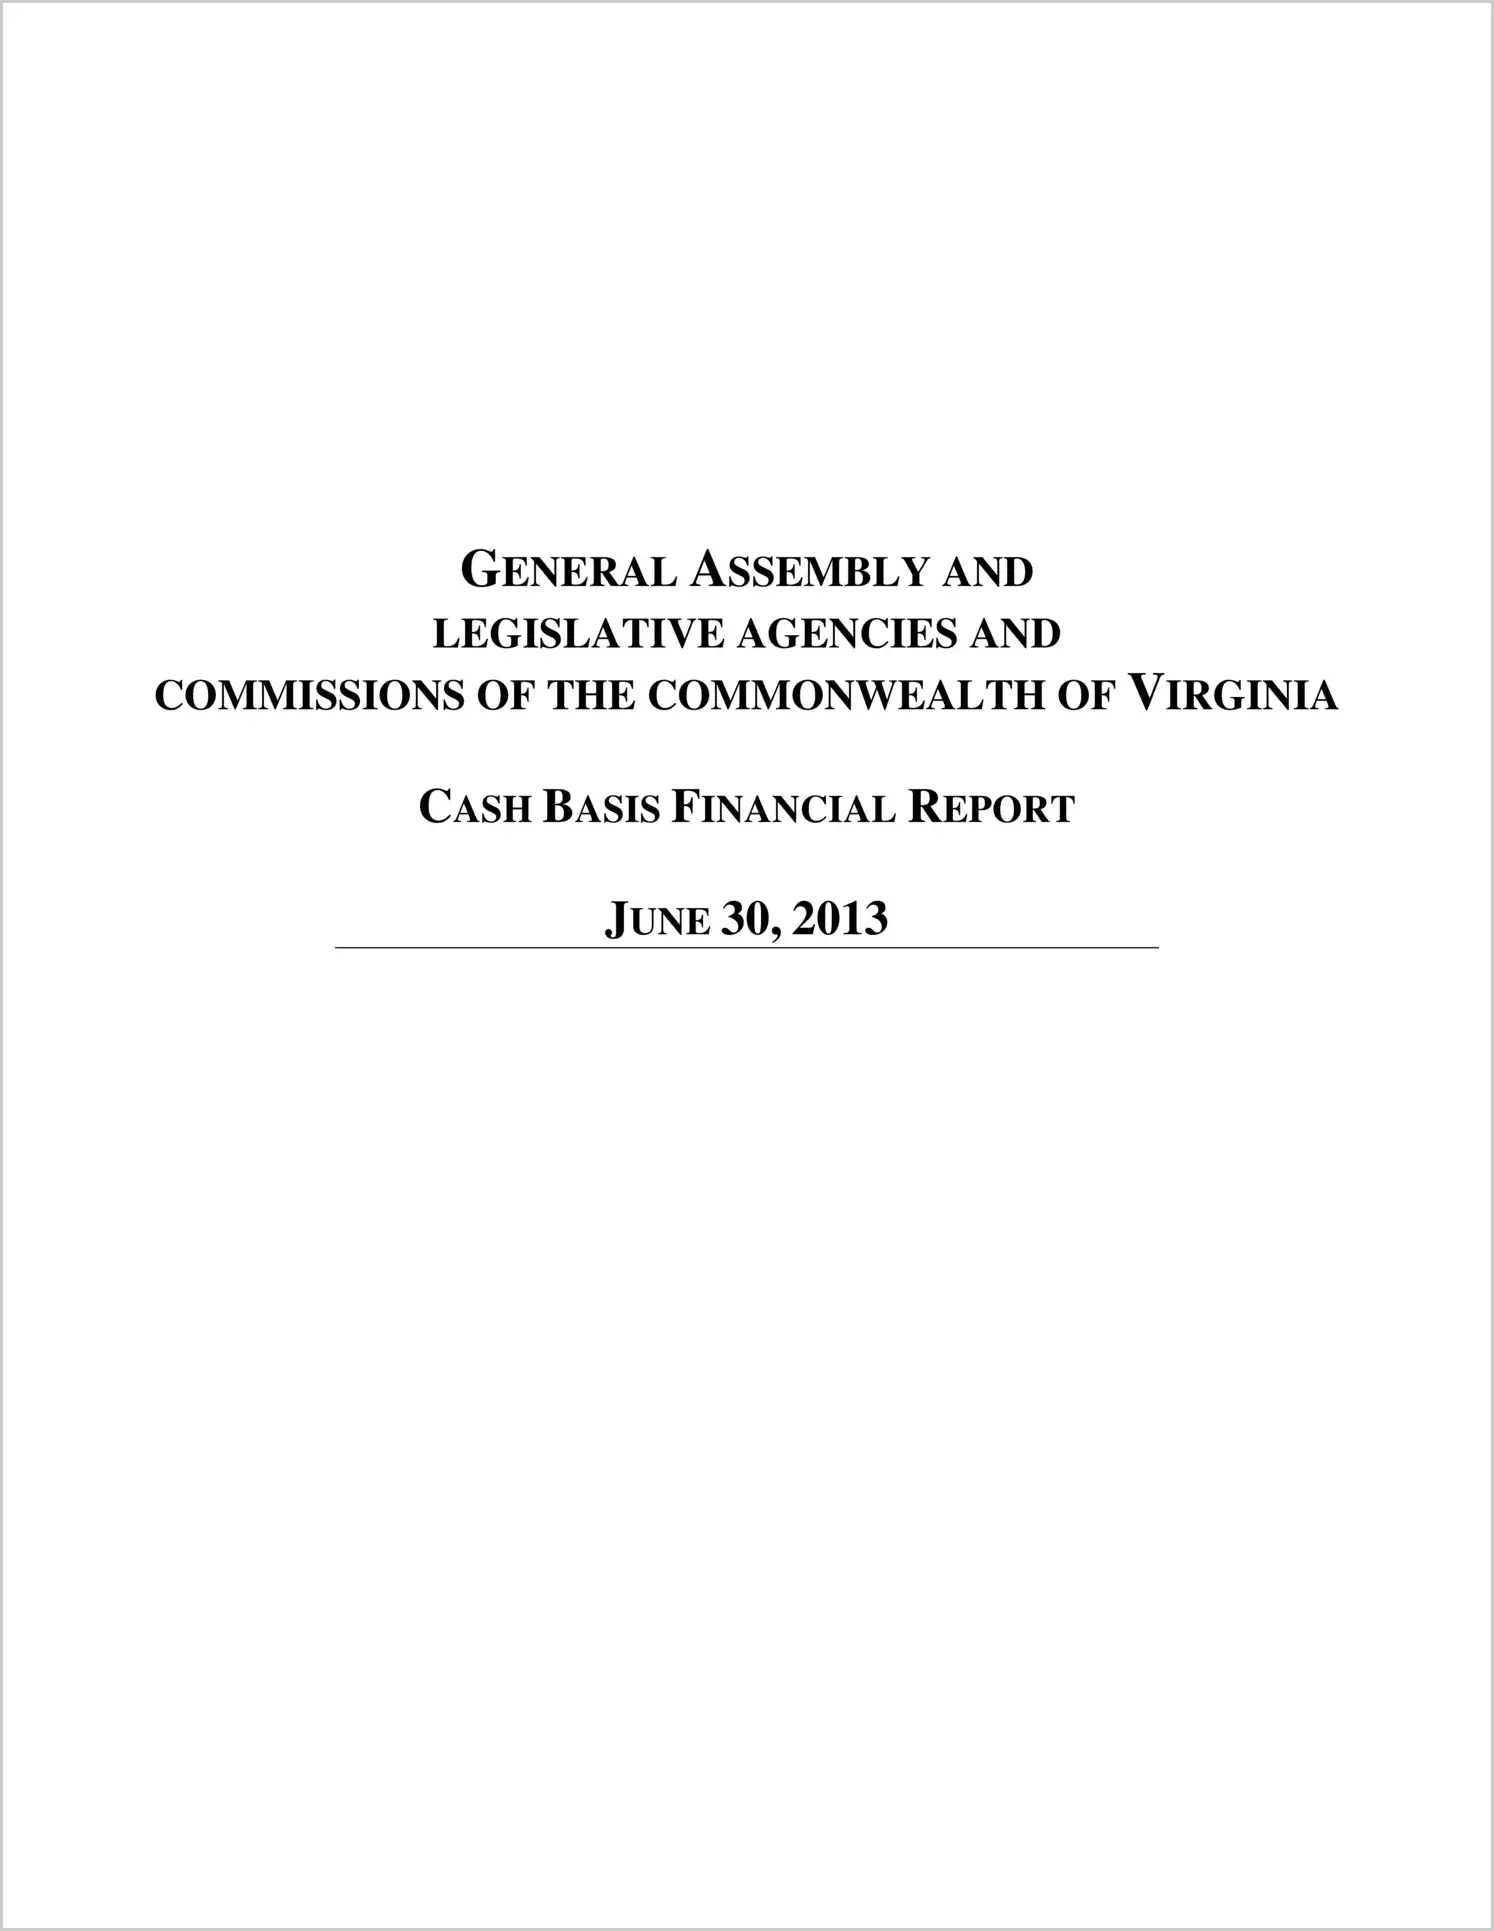 General Assembly and Legislative Agencies and Commissions of the Commonwealth of Virginia Financial Report for the Fiscal Year ended June 30, 2013